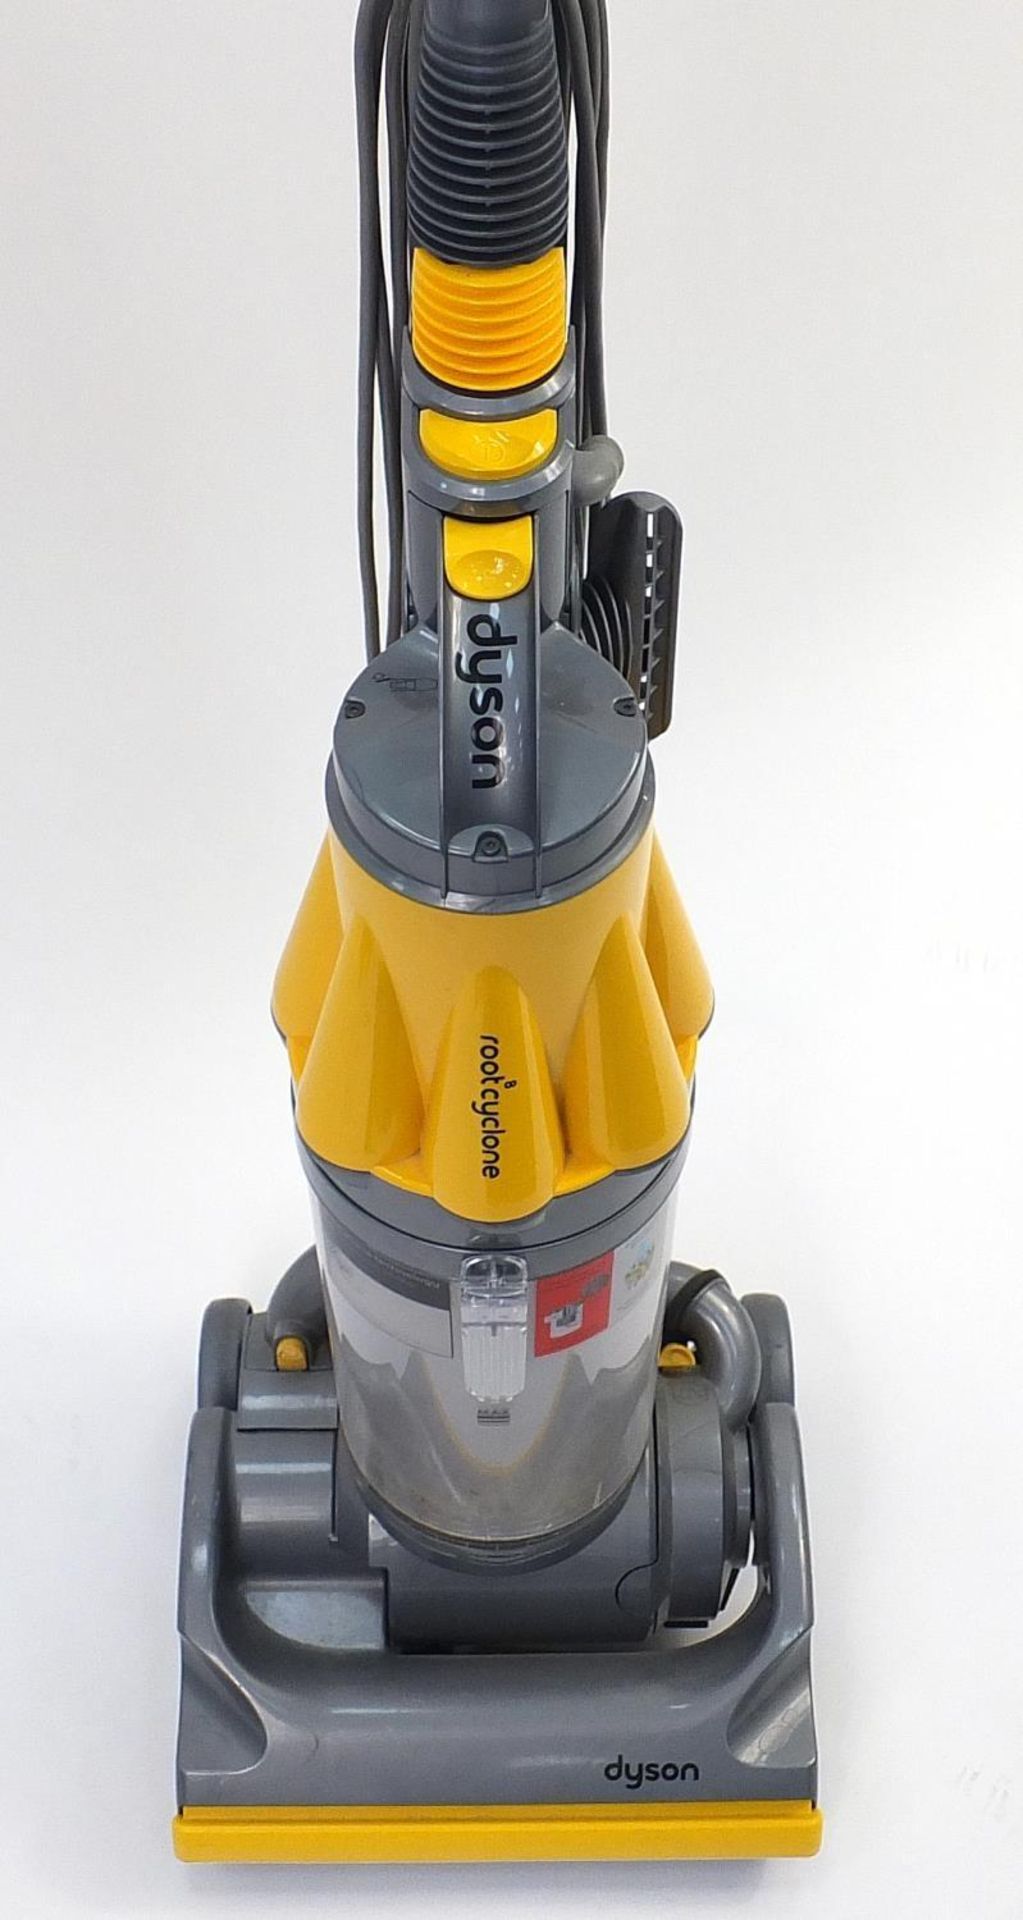 Dyson DC07 upright vacuum cleaner - Image 2 of 3